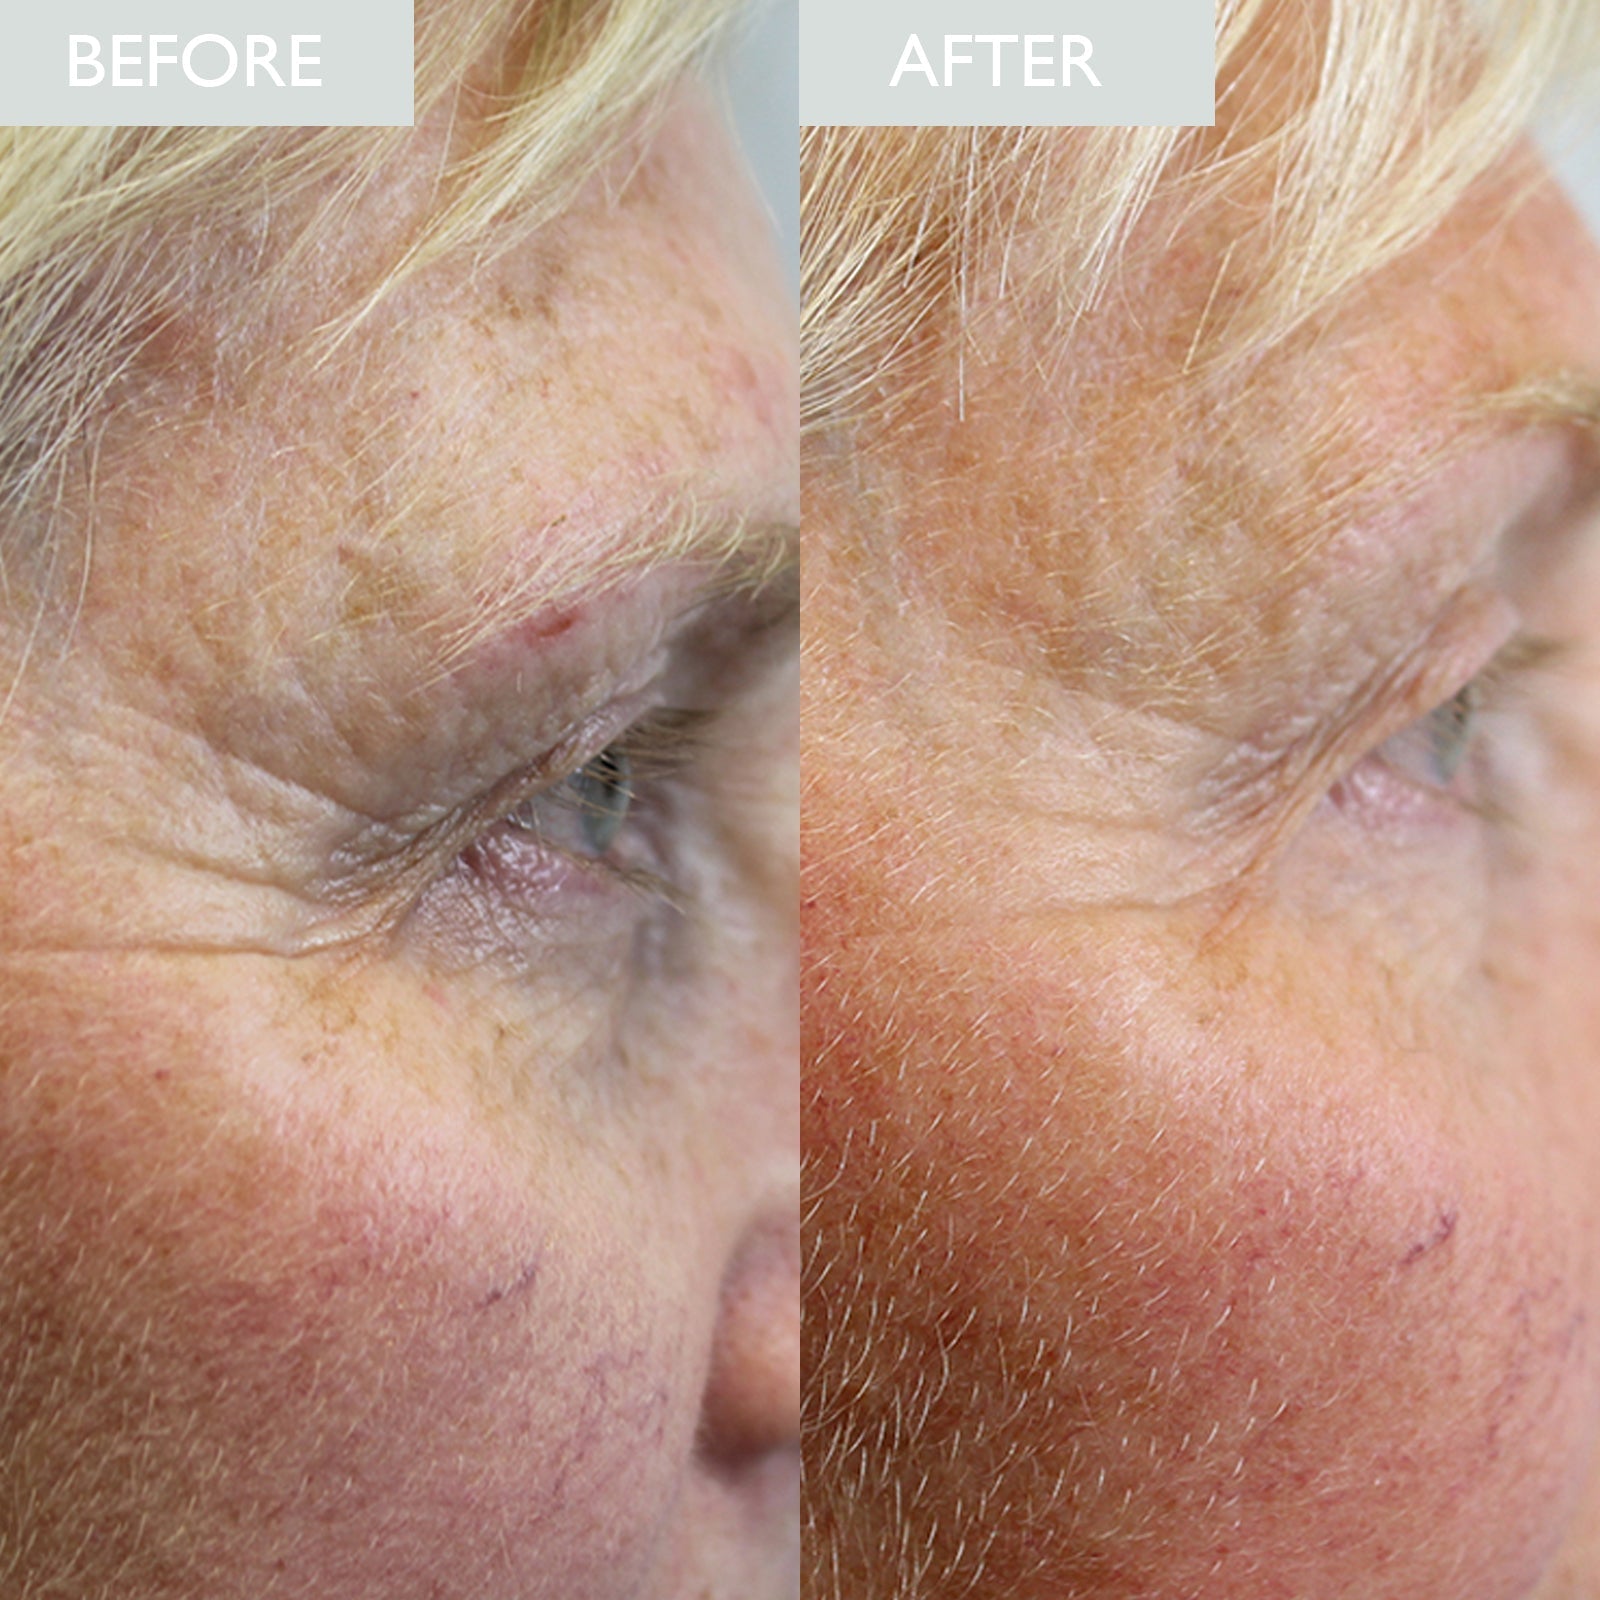 Before and After image showing an improvement in fine lines around the eye area with peptide eye cream